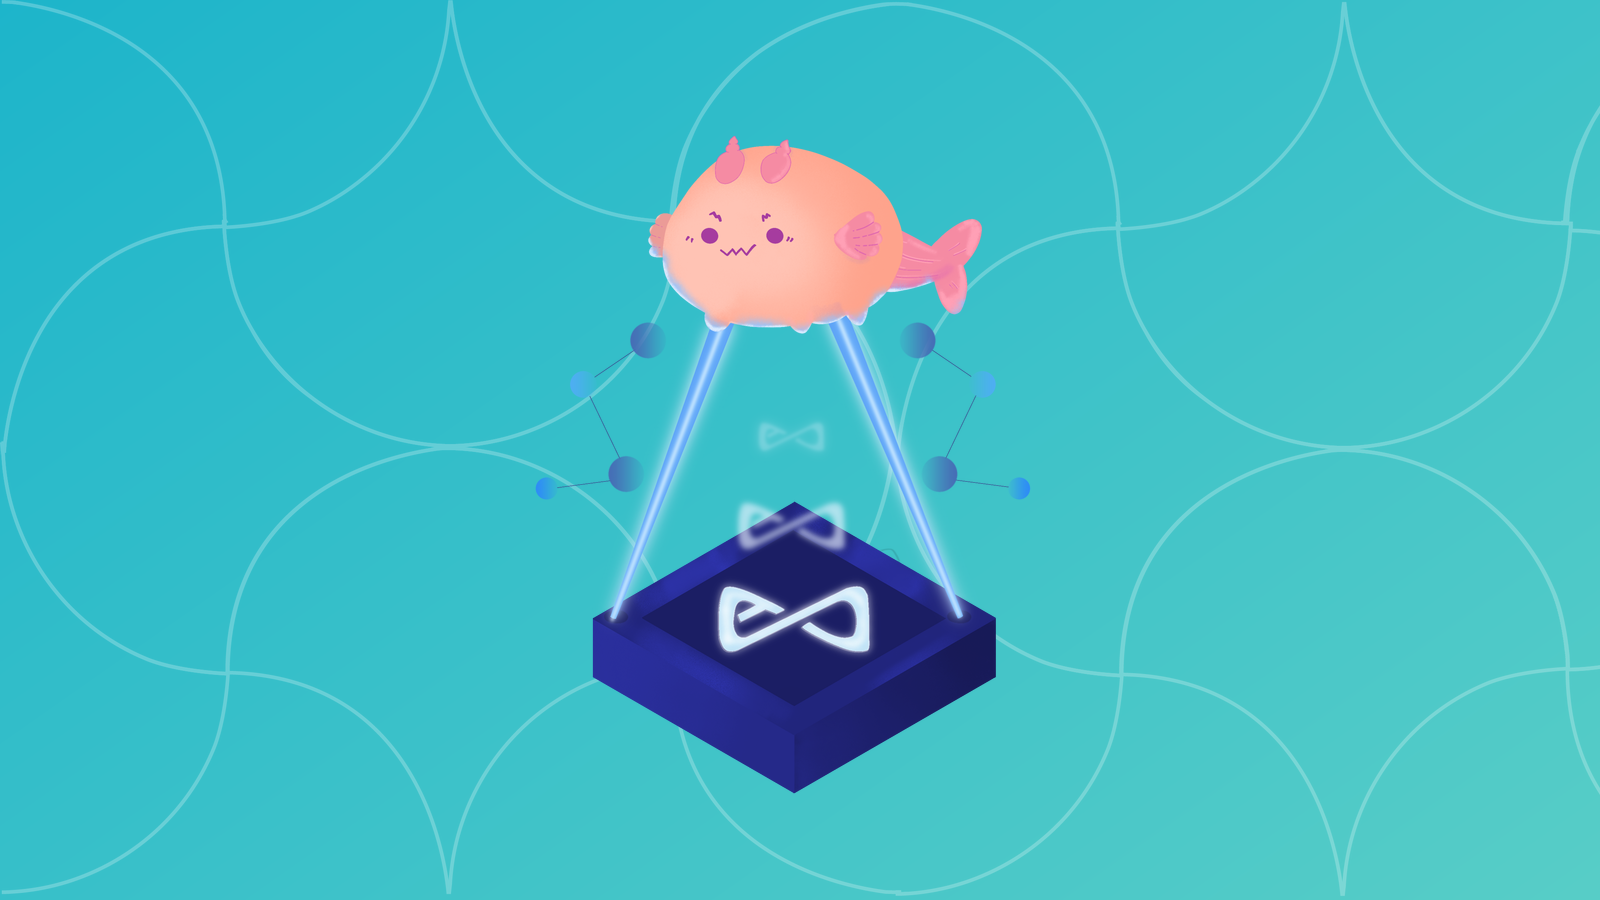 Axie Infinity – Unlimit your gaming experience